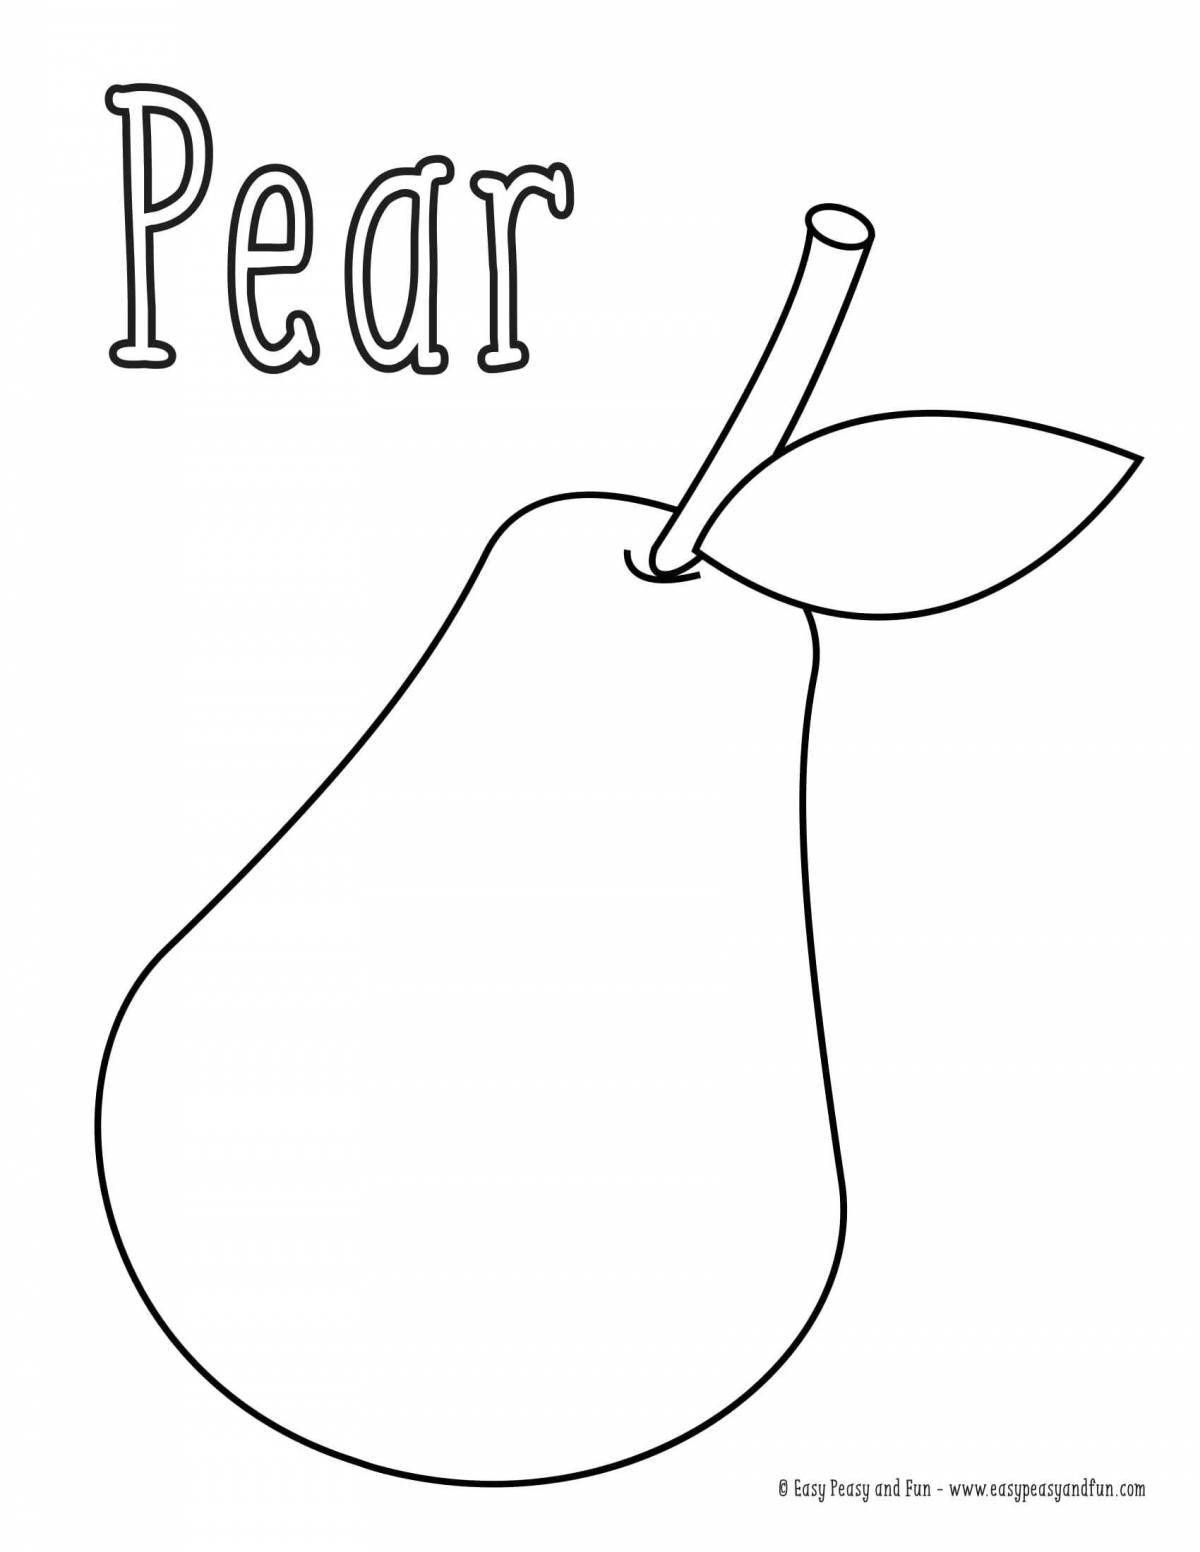 Sparkling pear coloring book for 3-4 year olds